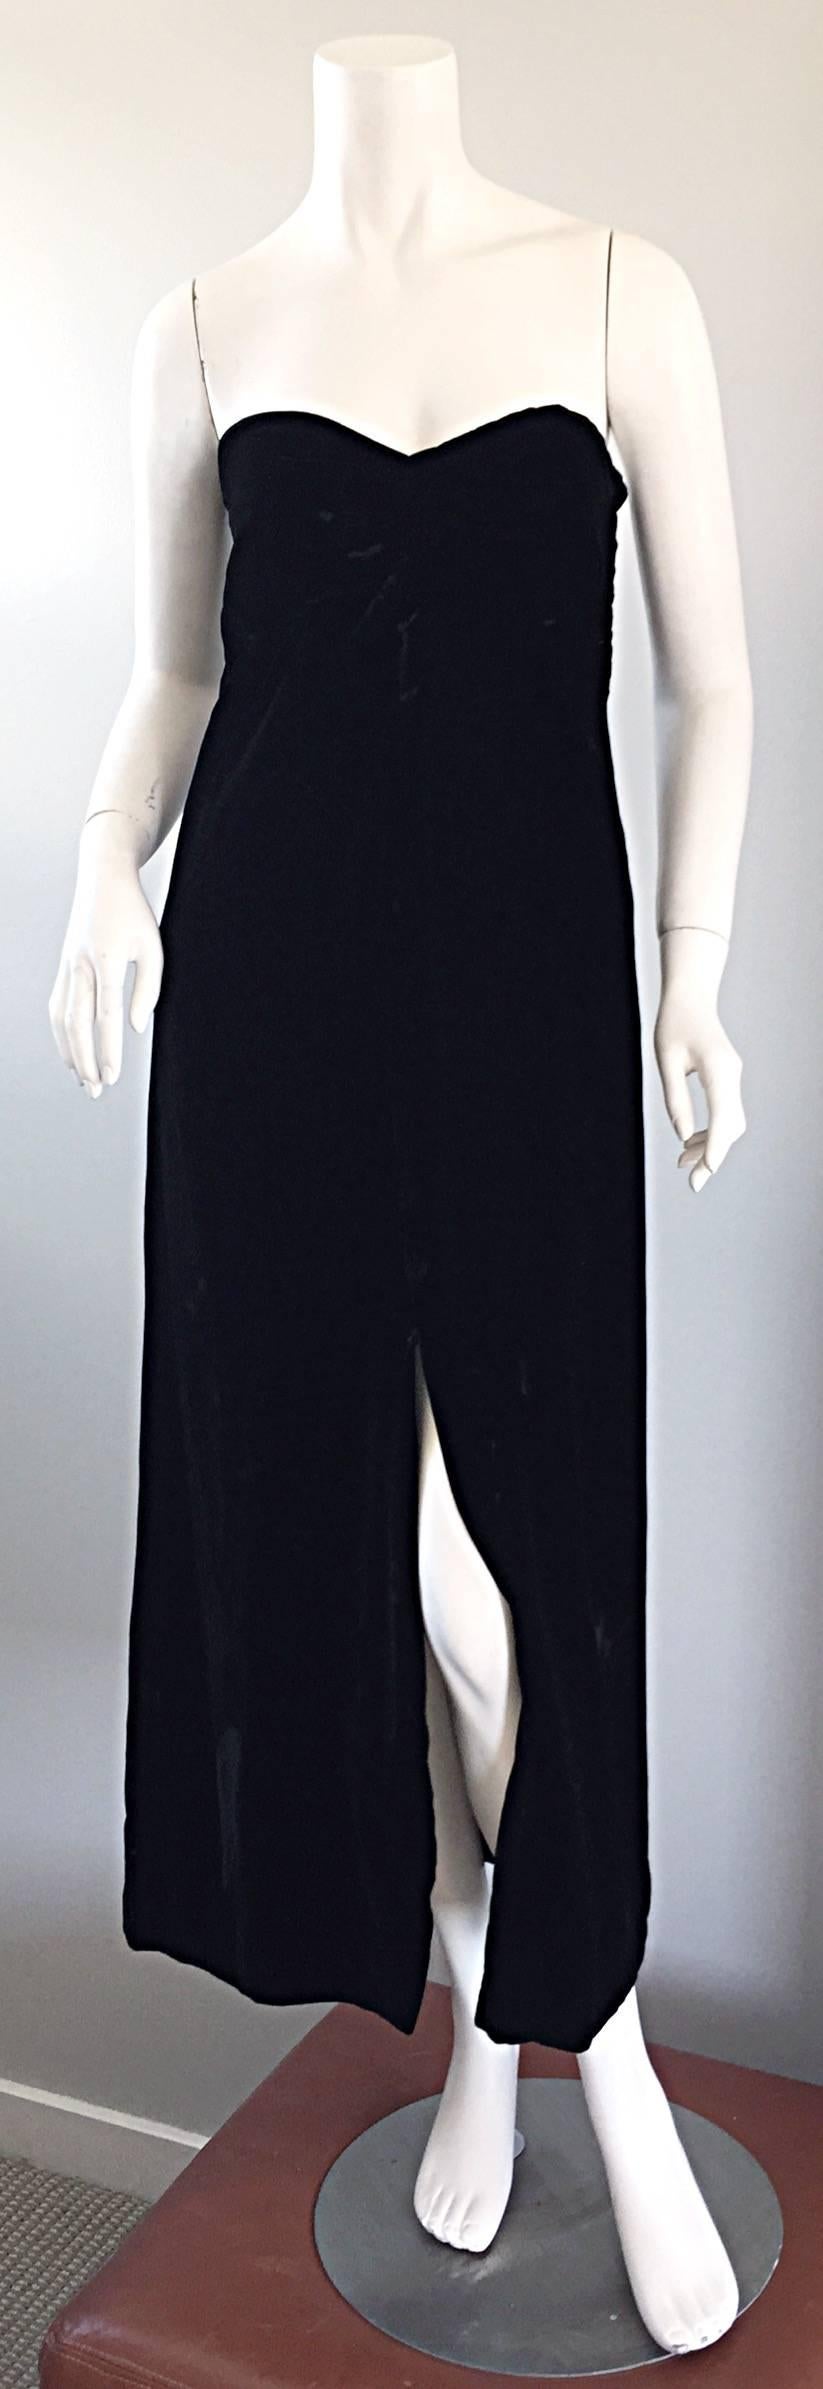 Splendid vintage Oscar de la Renta black silk velvet strapless dress! Simple, yet insanely elegant, with an enormous amount of detail! Bustier detail at bodice, with built in support. Slit up middle front. Has an empire fit, making it a very